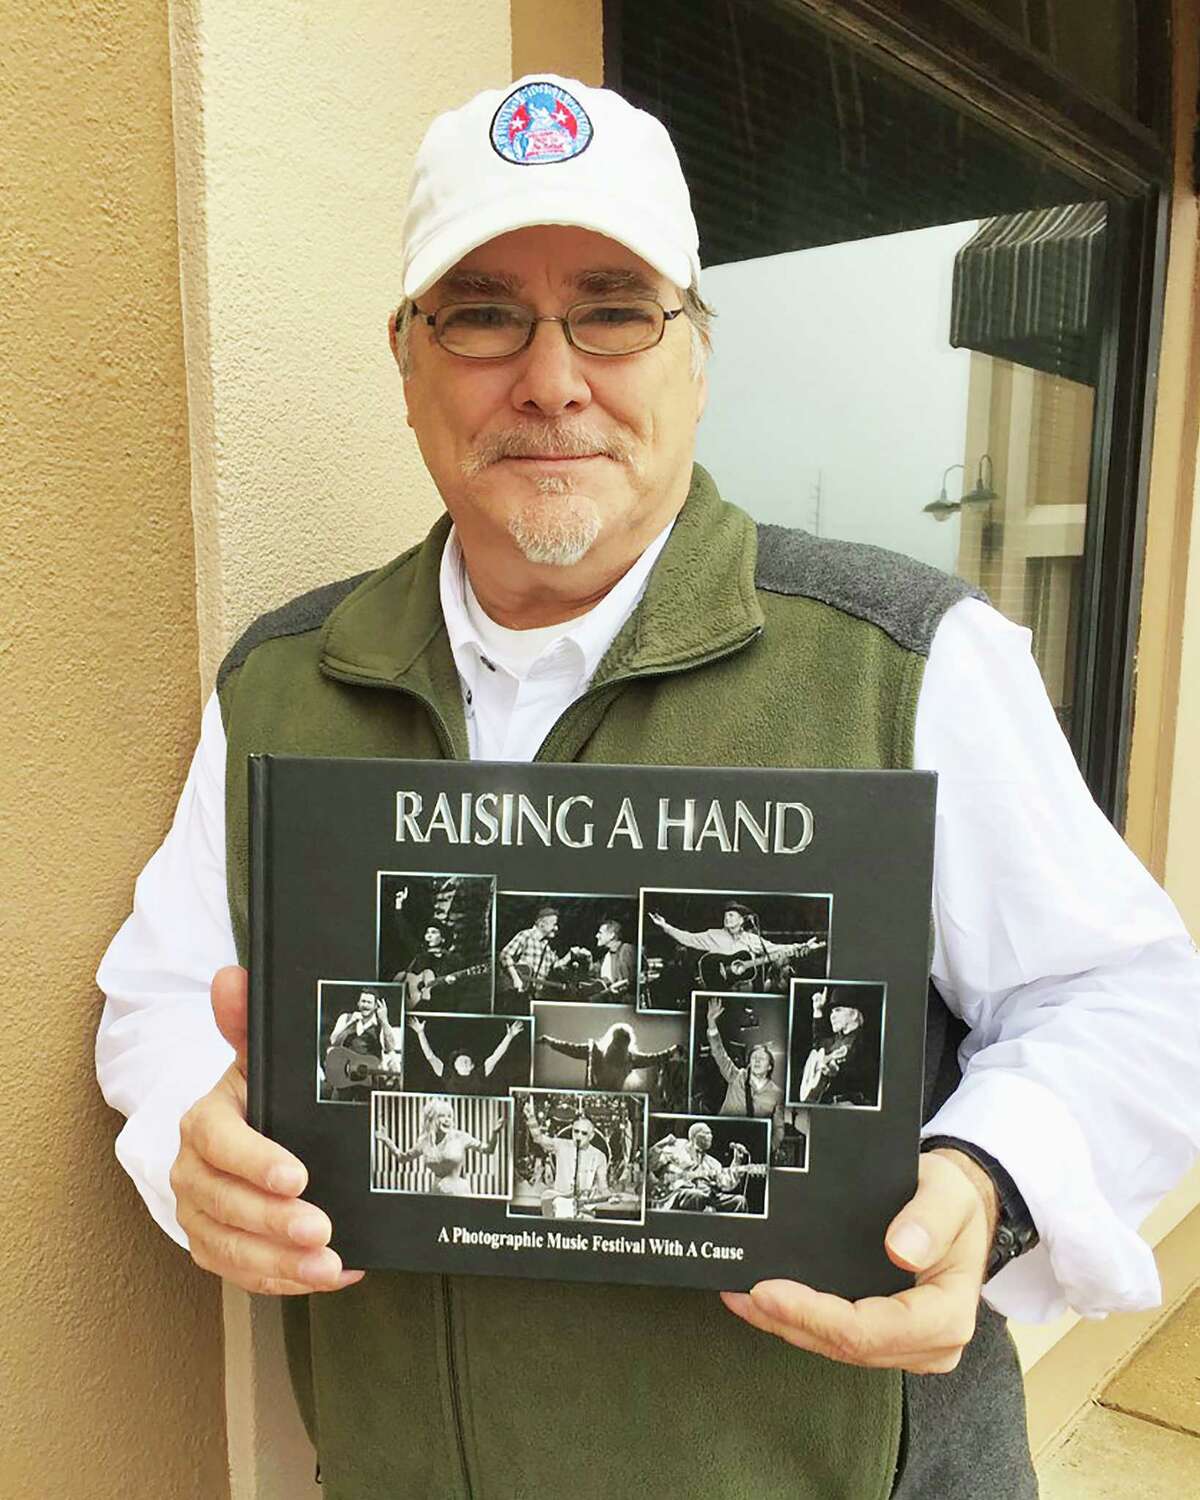 Musician and photographer Kevin Black is holding the book "Raising a Hand for Rett." Black lost his 16-year-old daughter Cortney to Rett Syndrome in 2003. Since then, Black and local photographer Dave Clements have launched the project "Raising a Hand for Rett" where they photograph music artists raising a hand. Vol. 1 was published in 2016. A second volume was released in July.